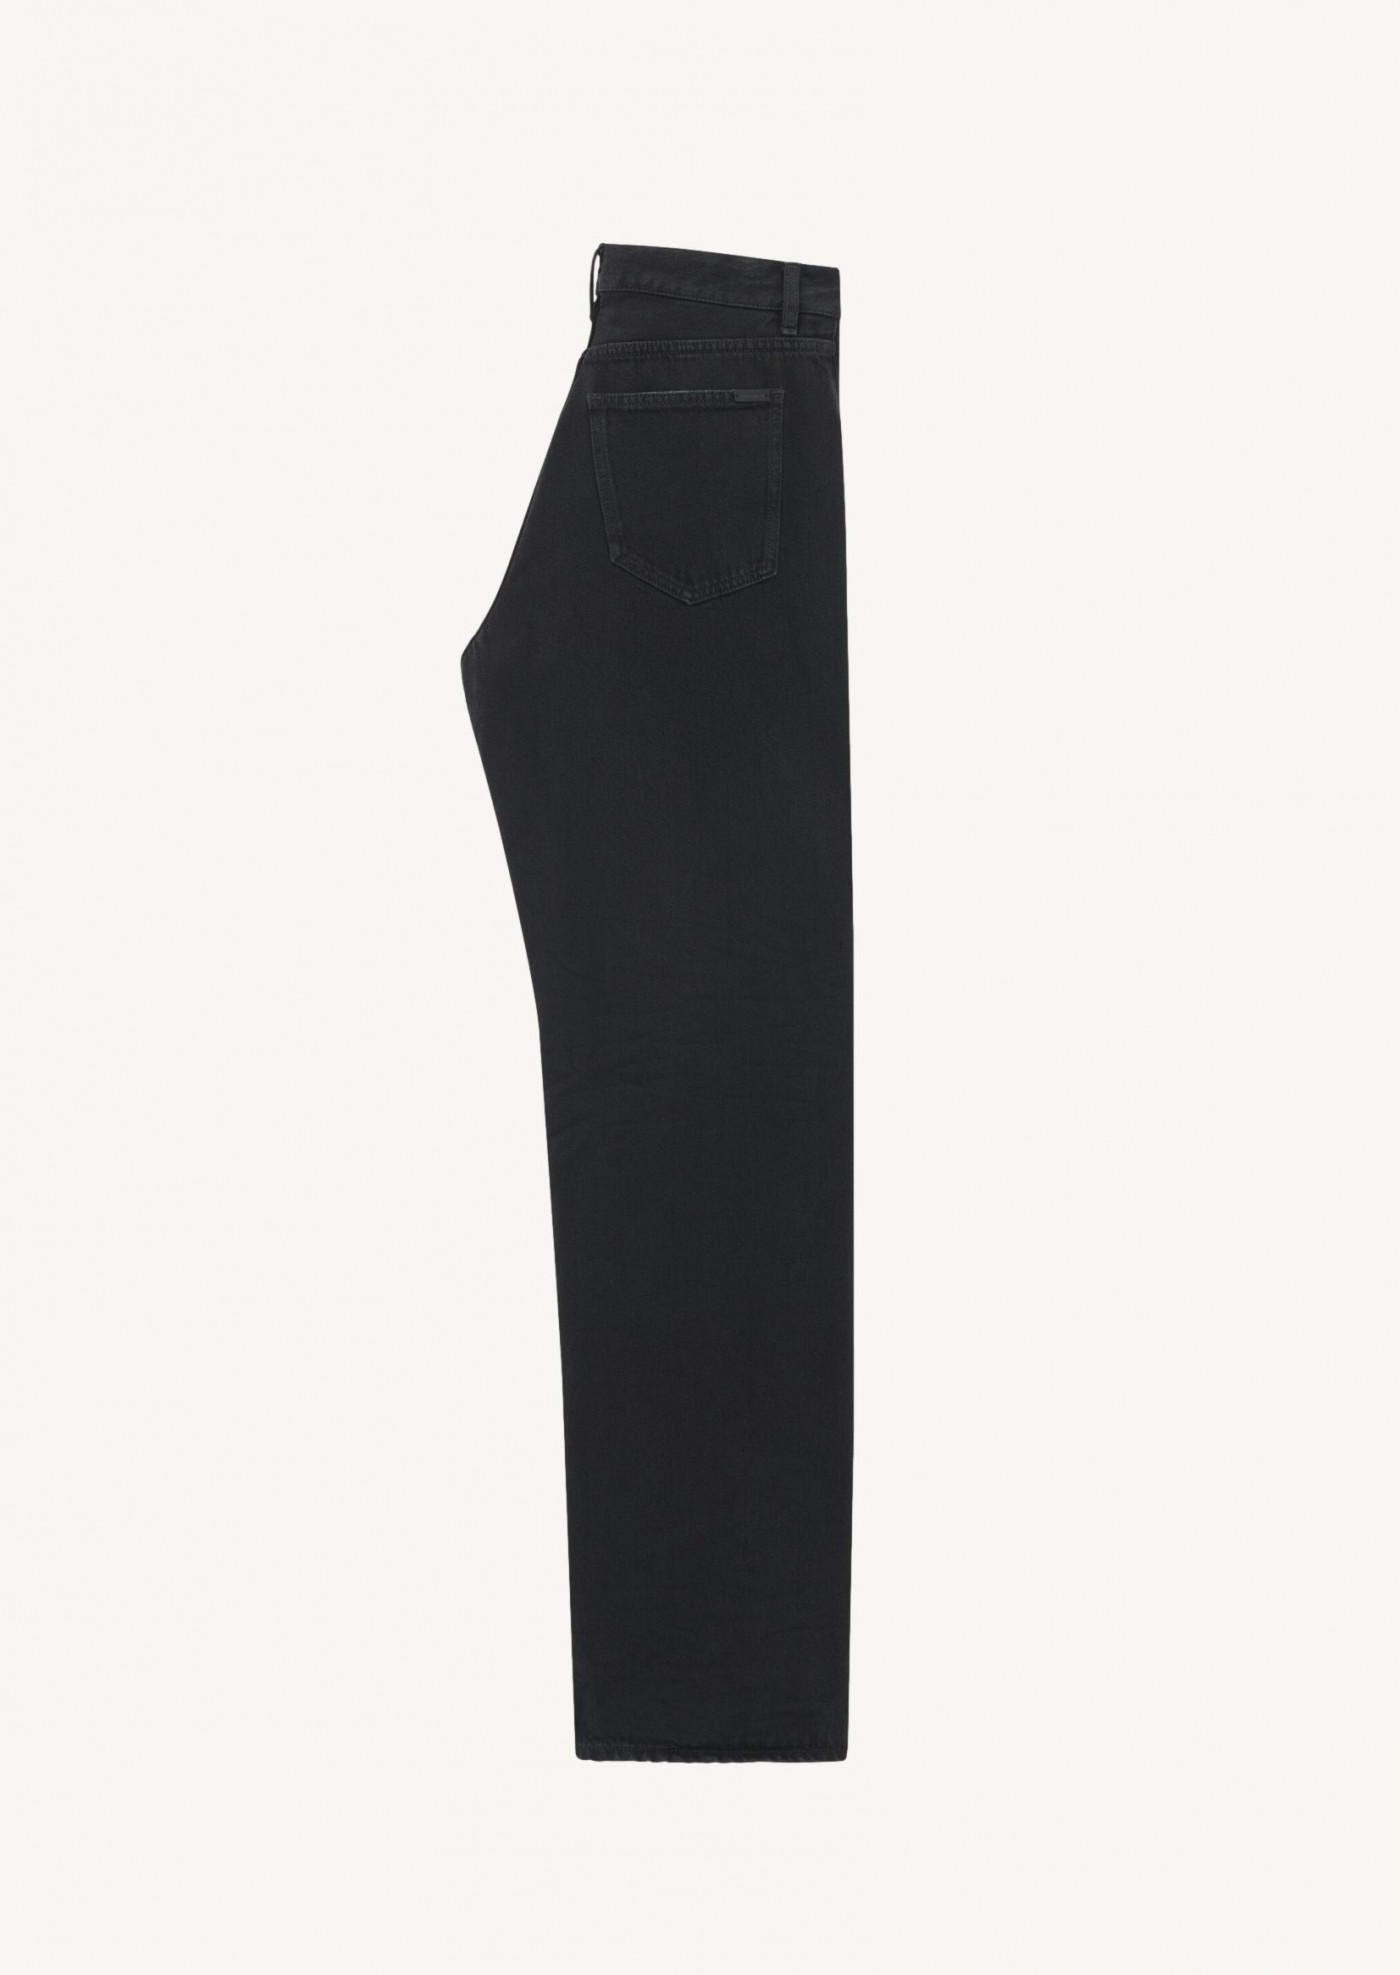 Extreme baggy long jeans in carbon black denim